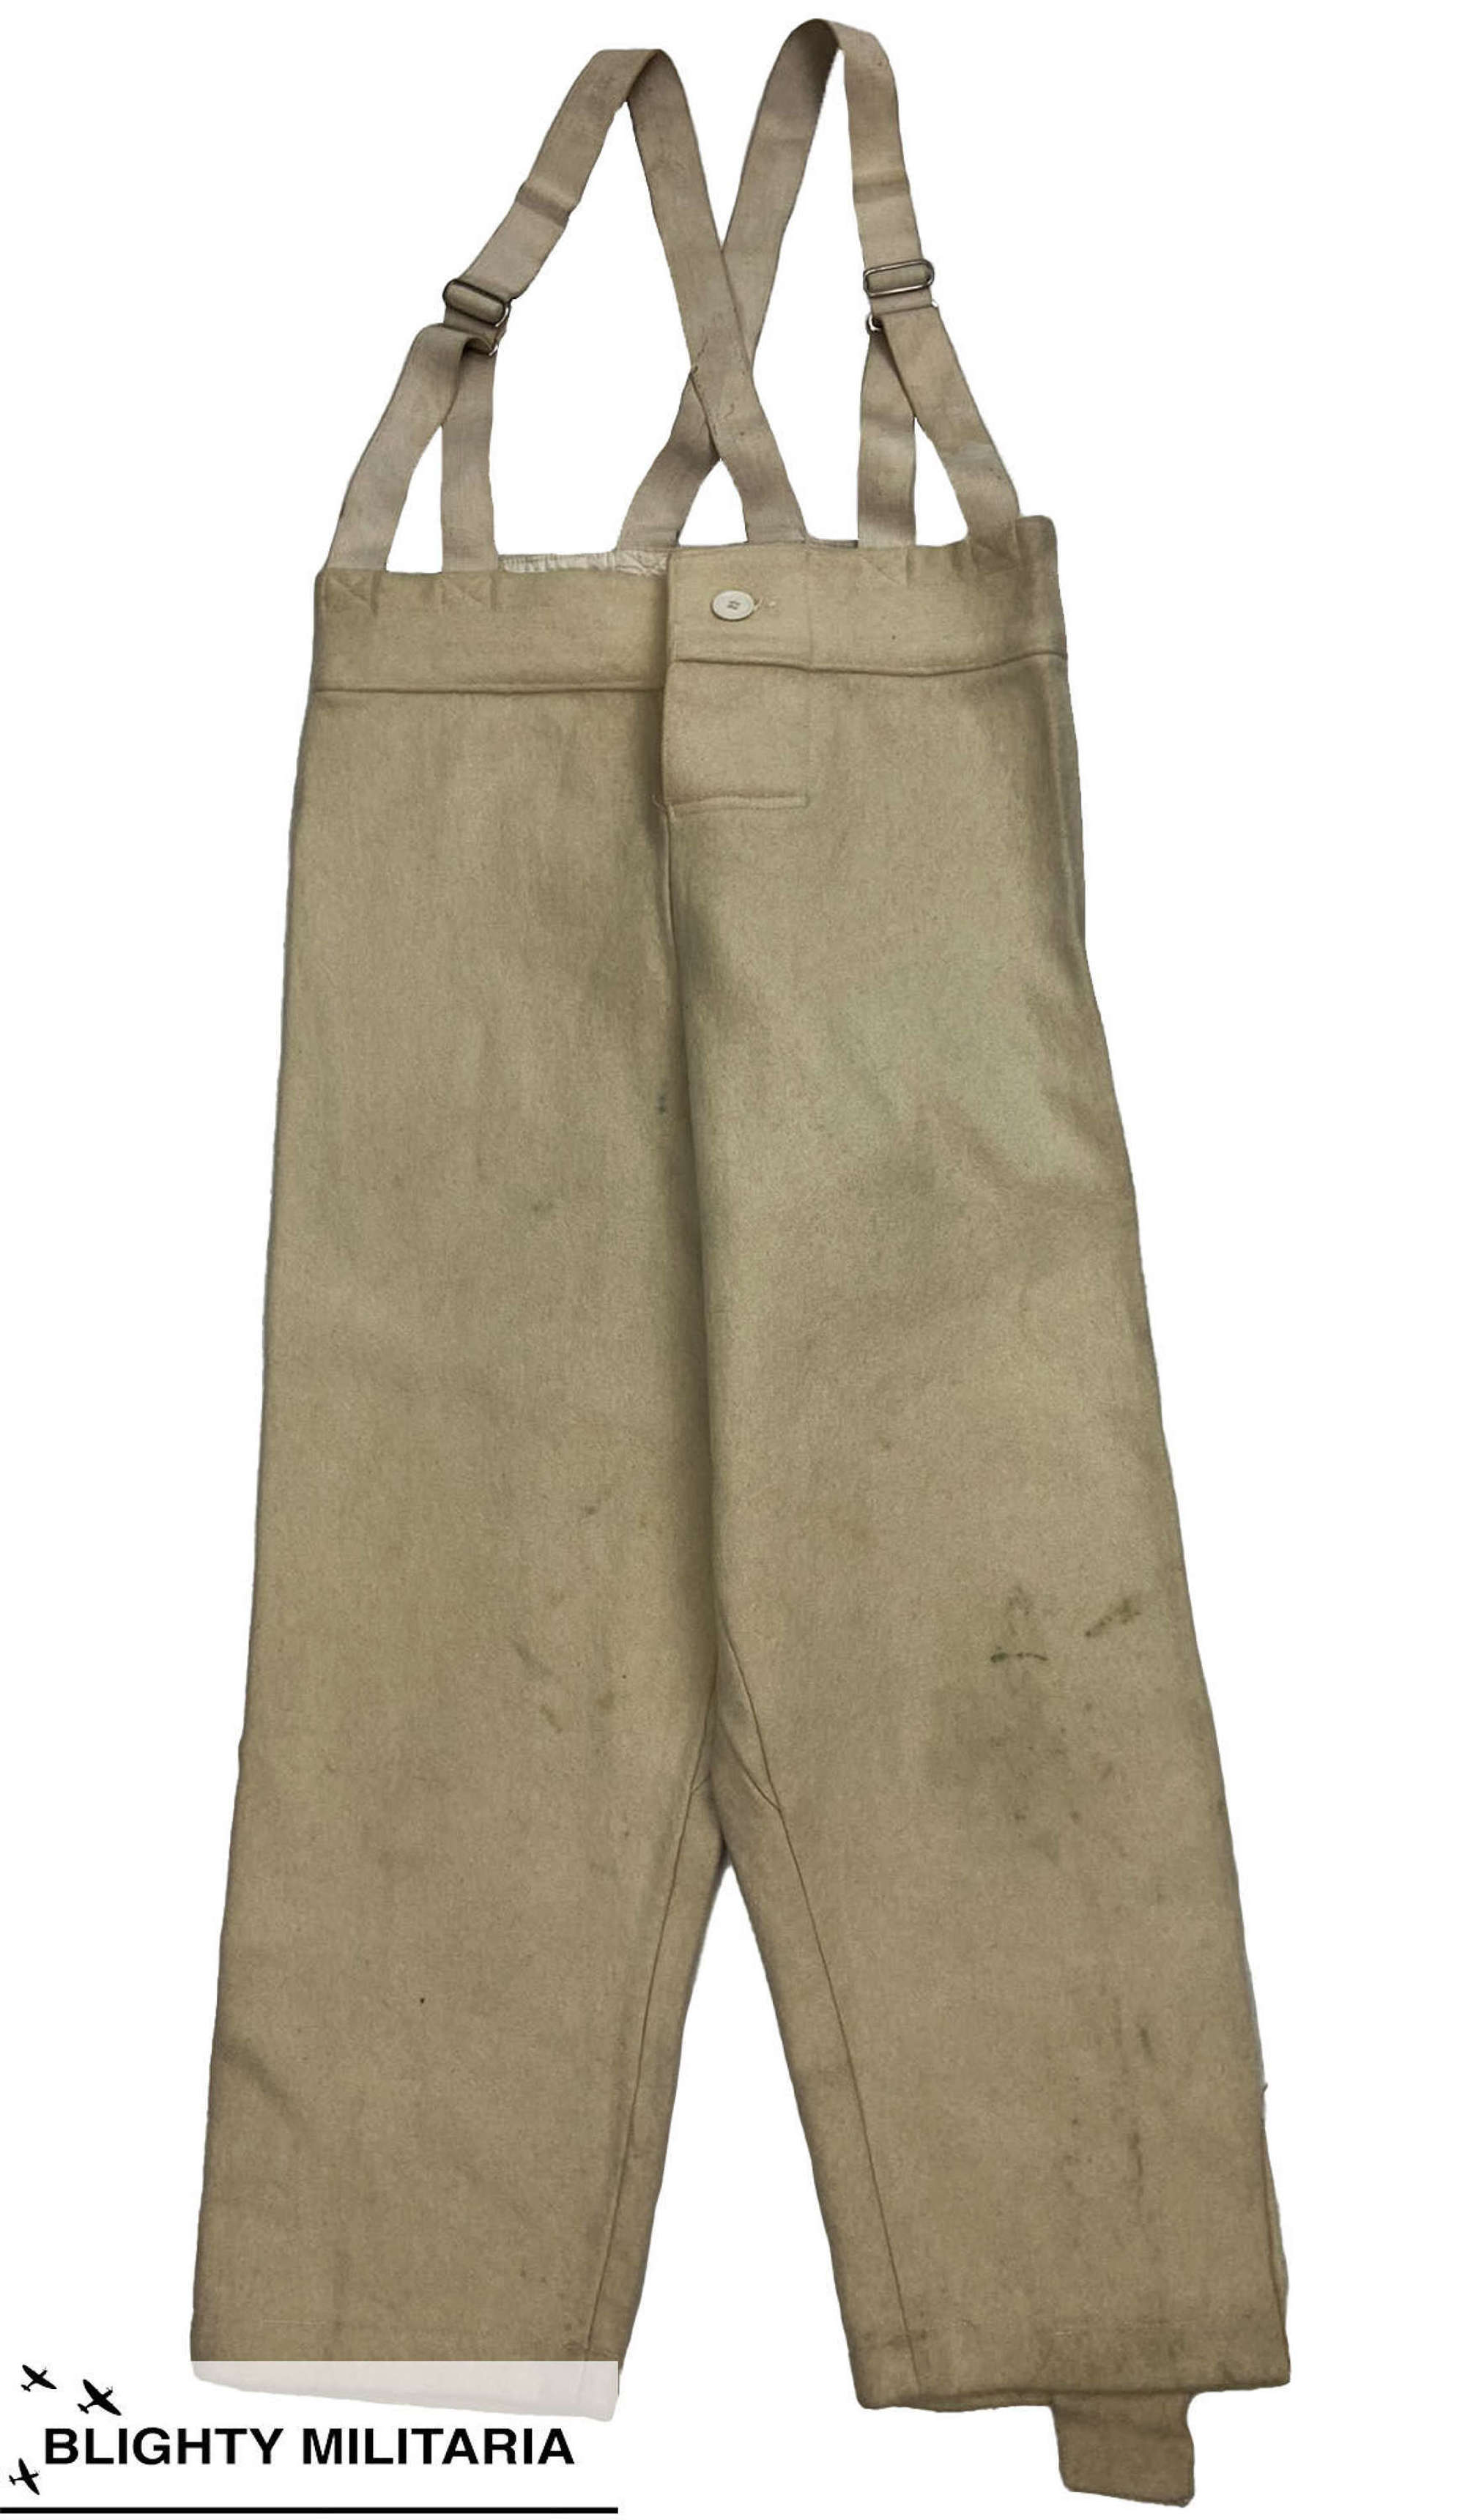 Original 1950s RAF Fearnought Fire Fighters Trousers